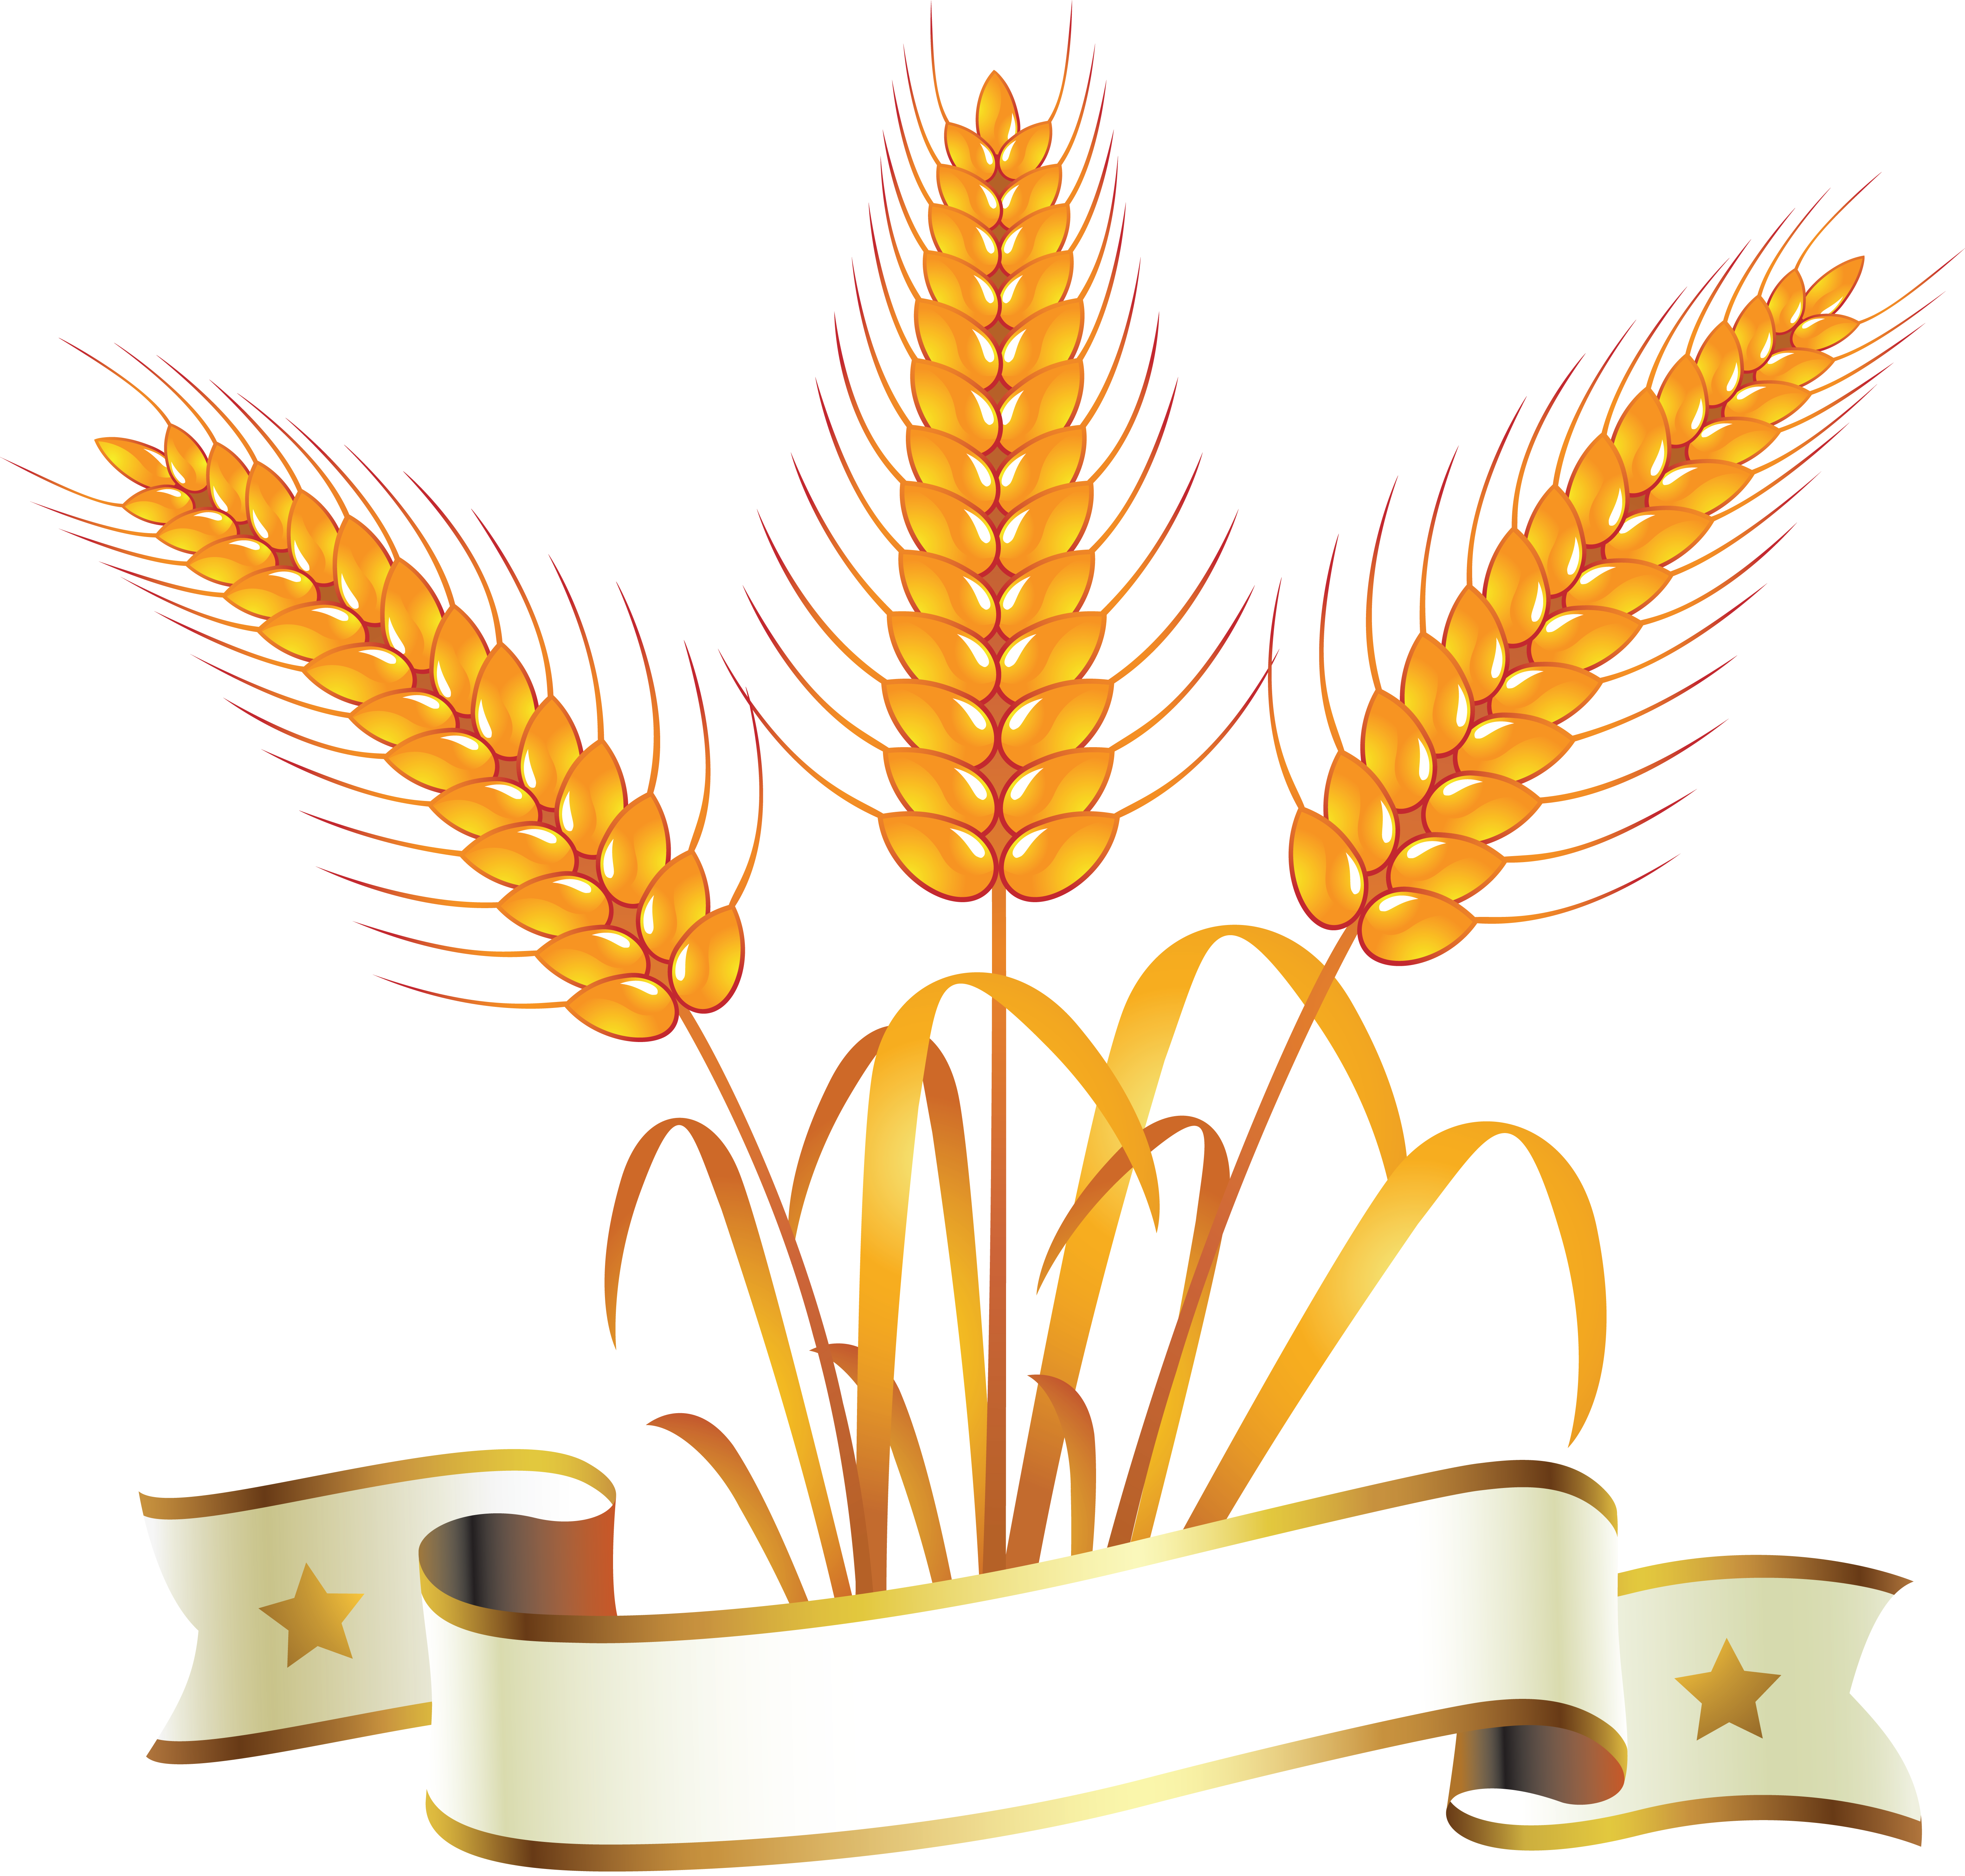 Wheat clipart wheat field. Png image purepng free